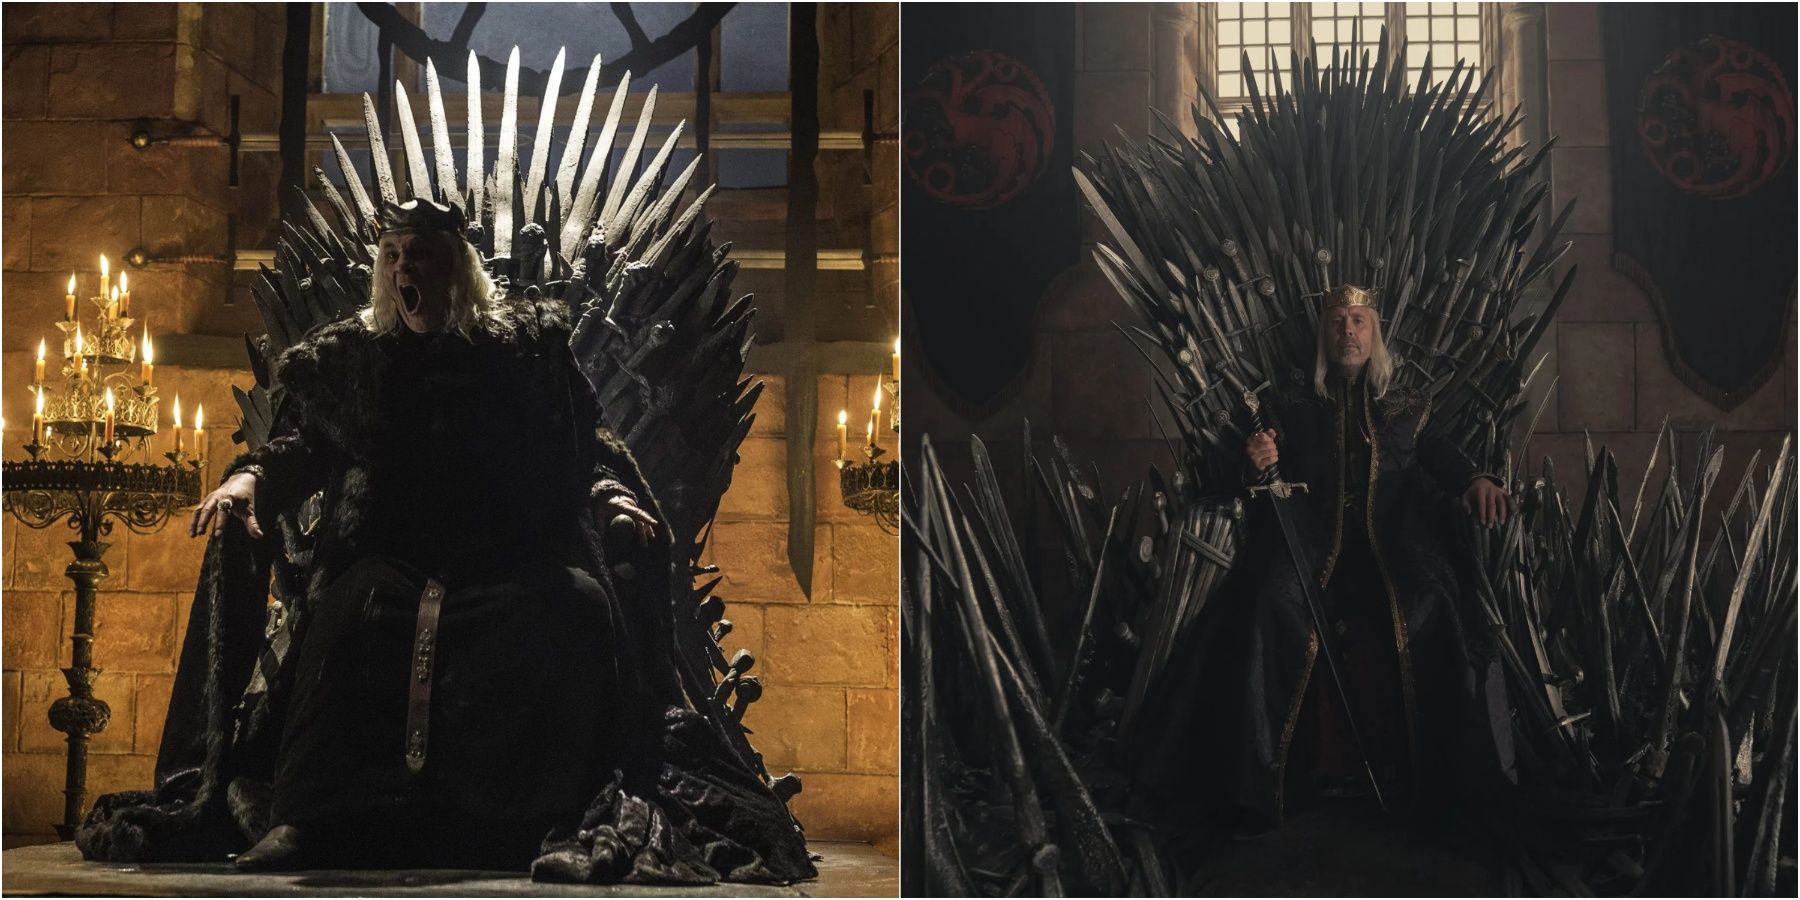 Split image of the Mad King in Game of Thrones and King Viserys in House of the Dragon sitting on the Iron Throne.